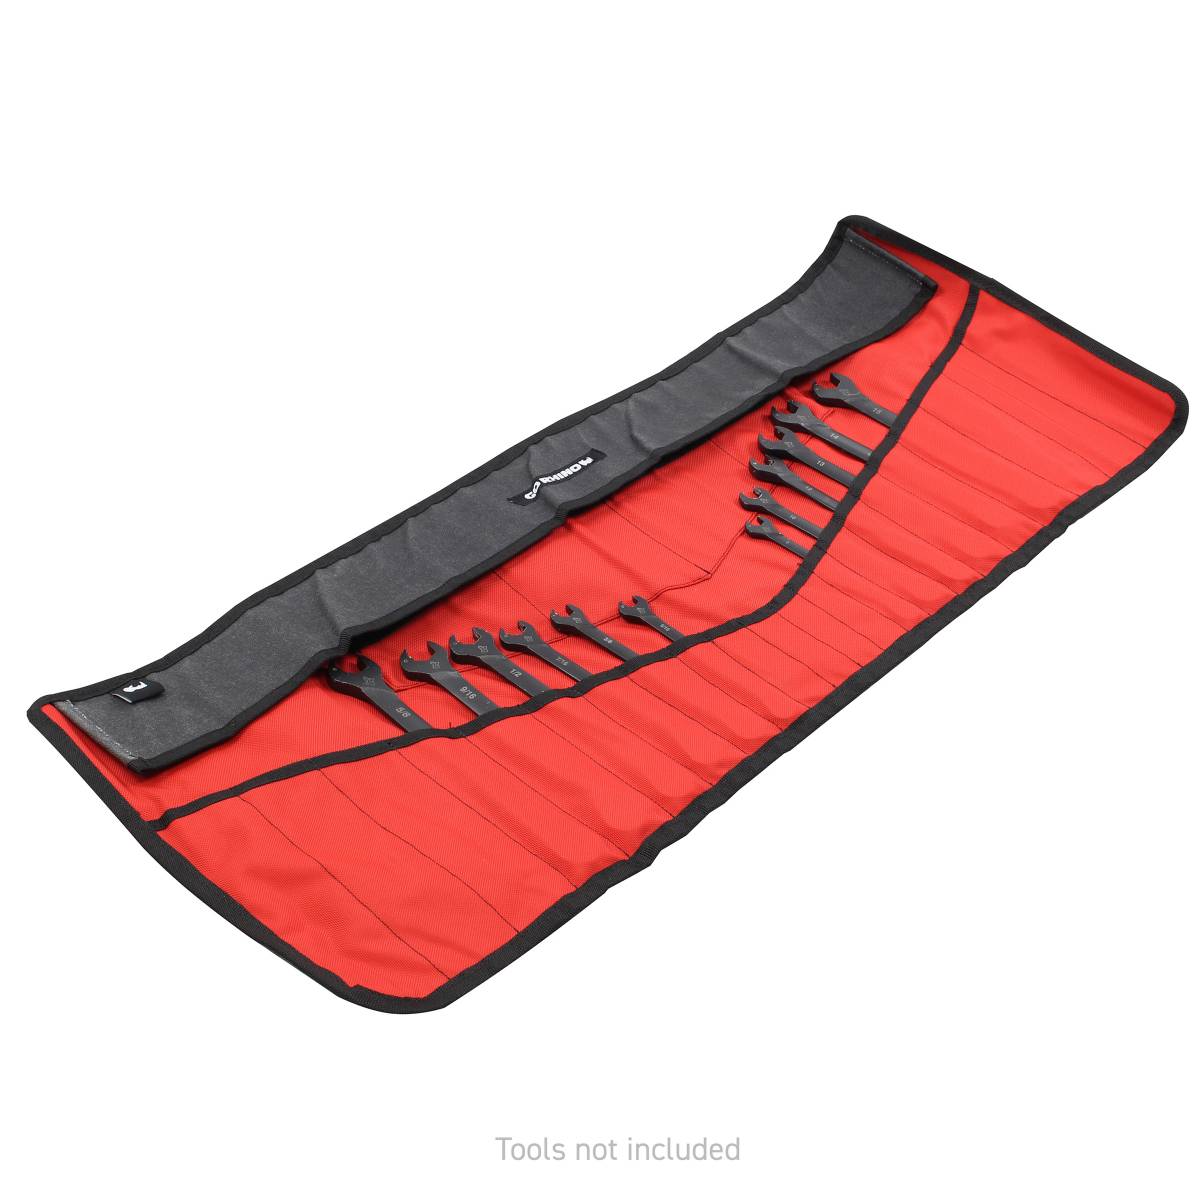 XVenture Gear Tool Roll - Small